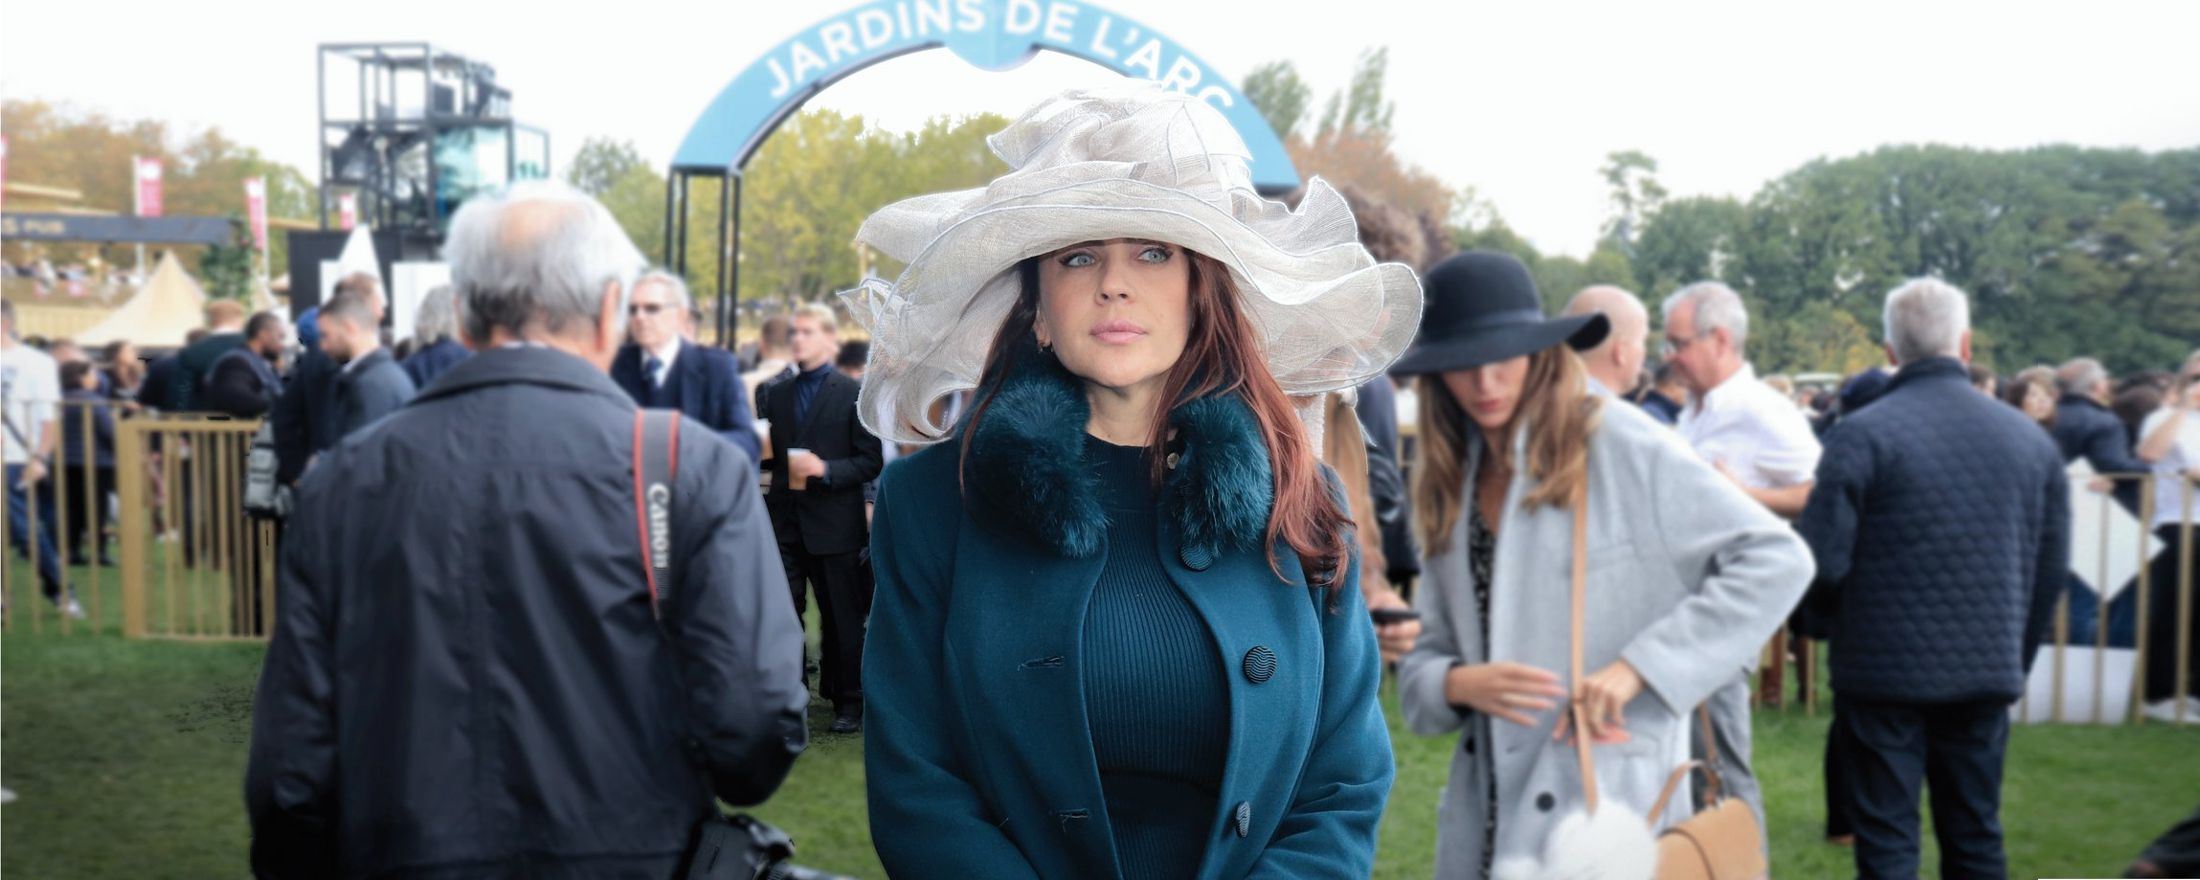 A beautiful woman using a fashionable hat during a luxury travel event in Paris